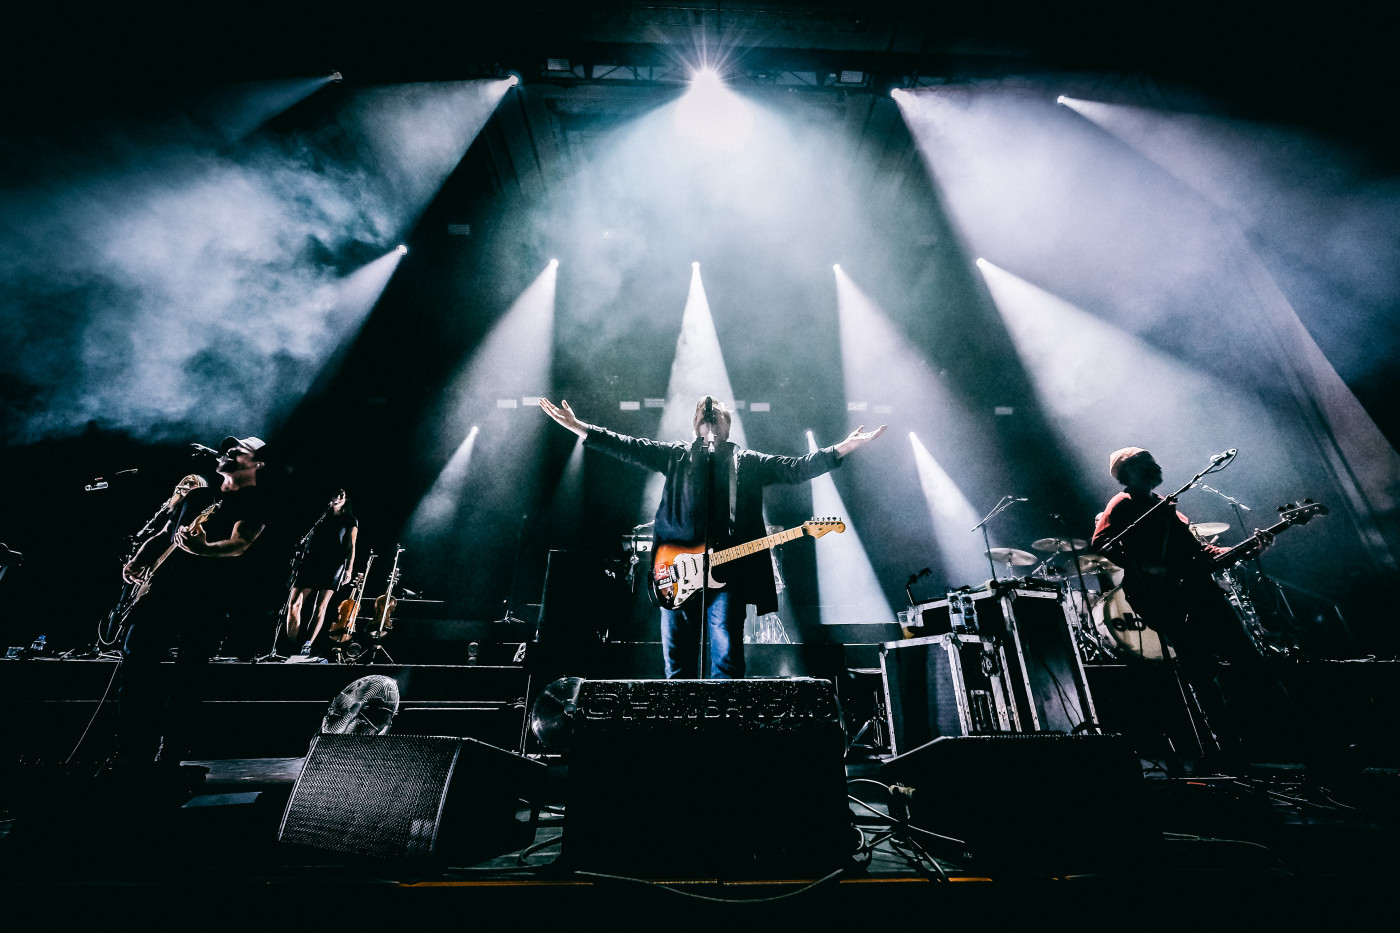 Elbow perform onstage at Usher Hall in Edinburgh on 8th September 2021